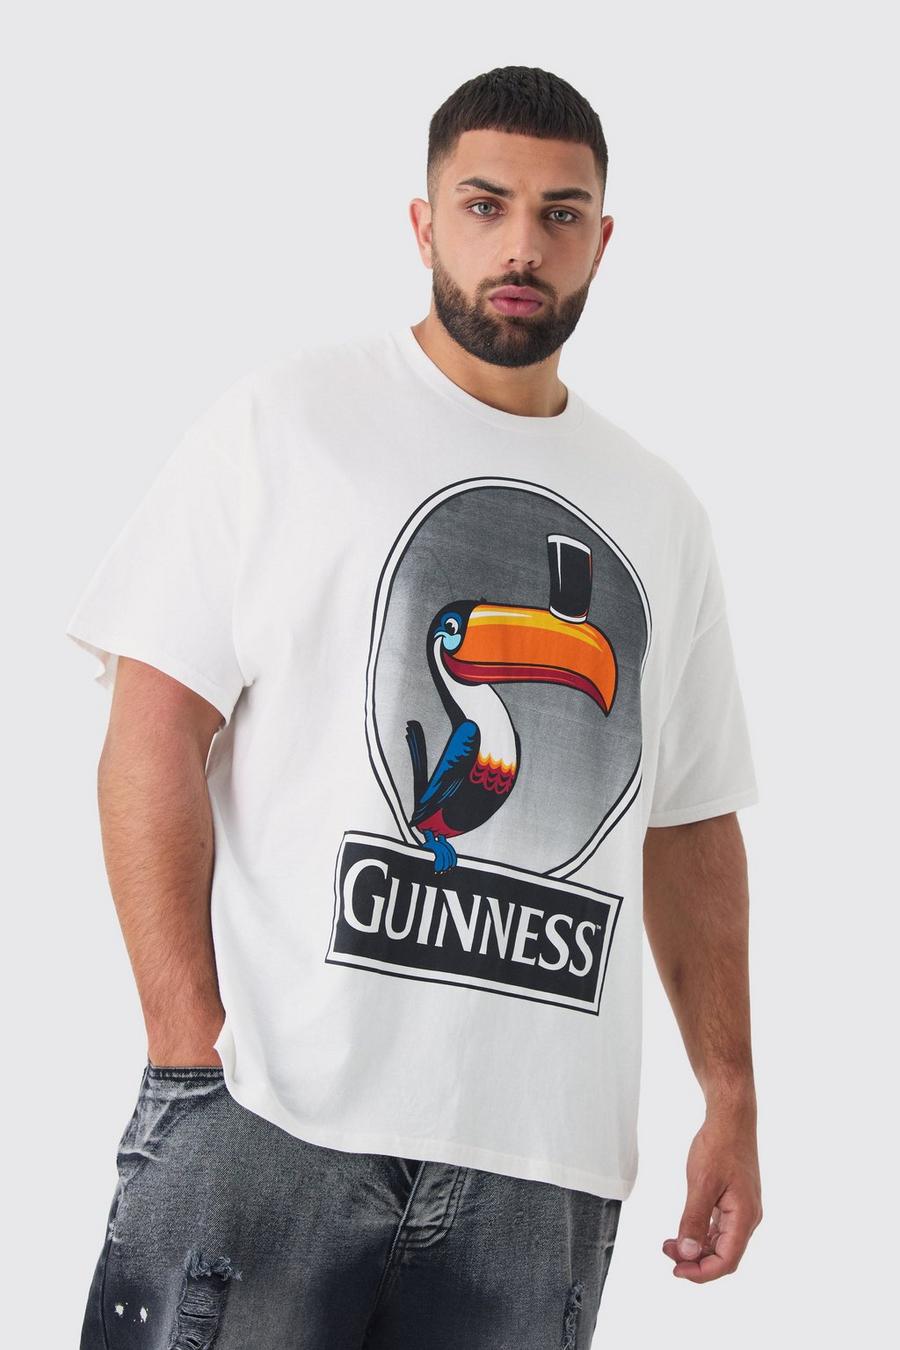 Plus Guinness Printed Licensed T-shirt In White image number 1